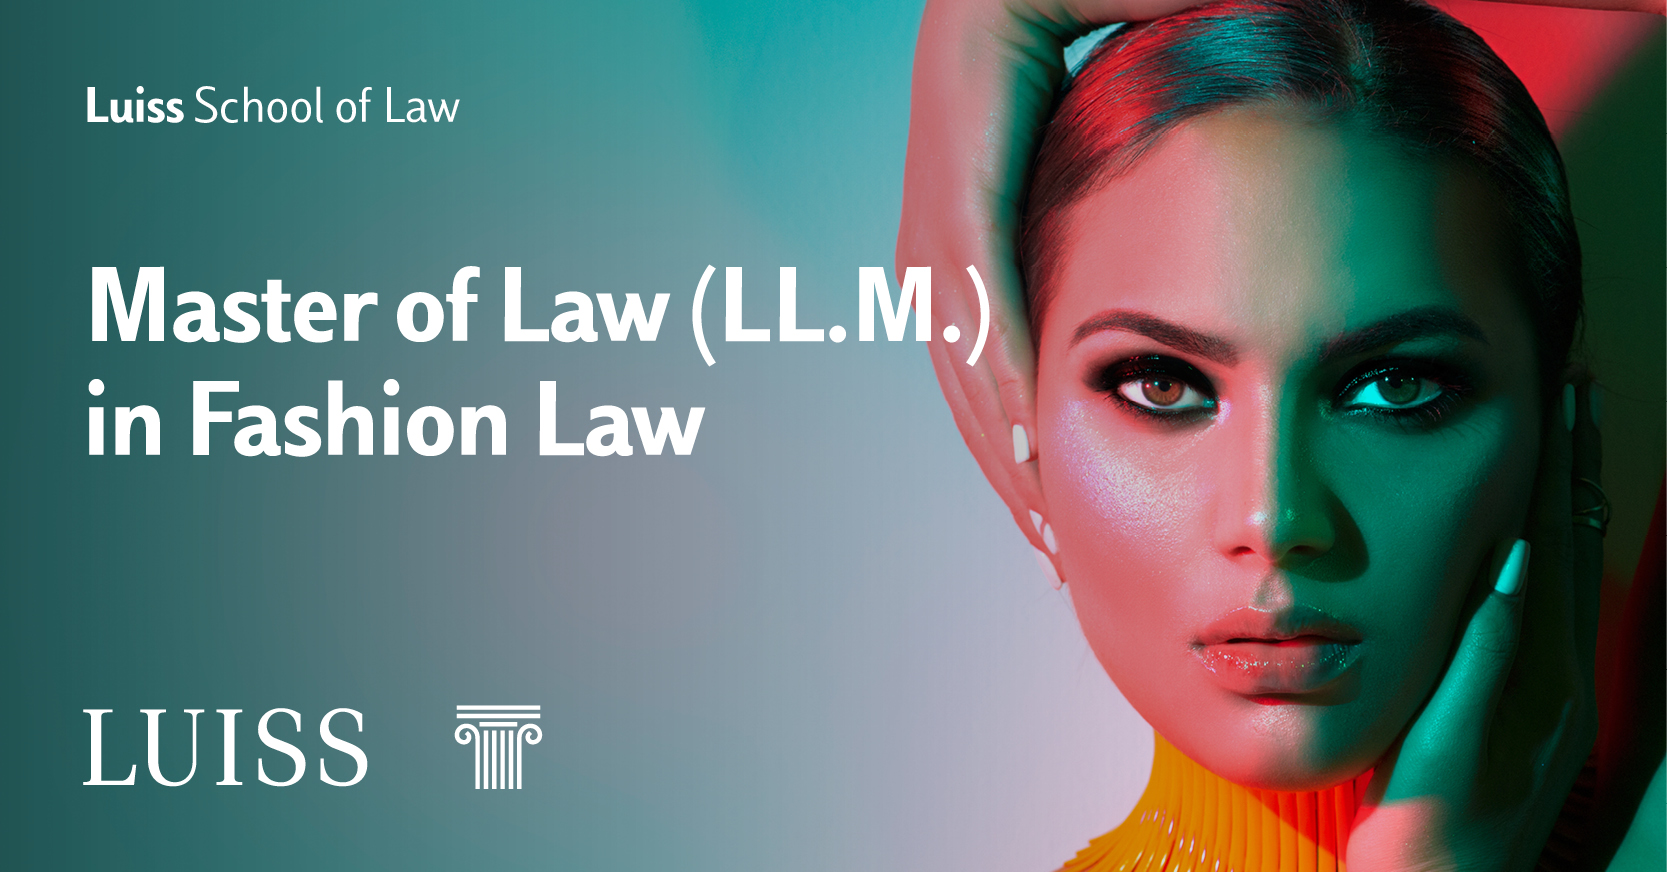 Master (LL.M.) in Fashion Law: application for a.y. 2021/2022 are now open!  - LUISS School of Law